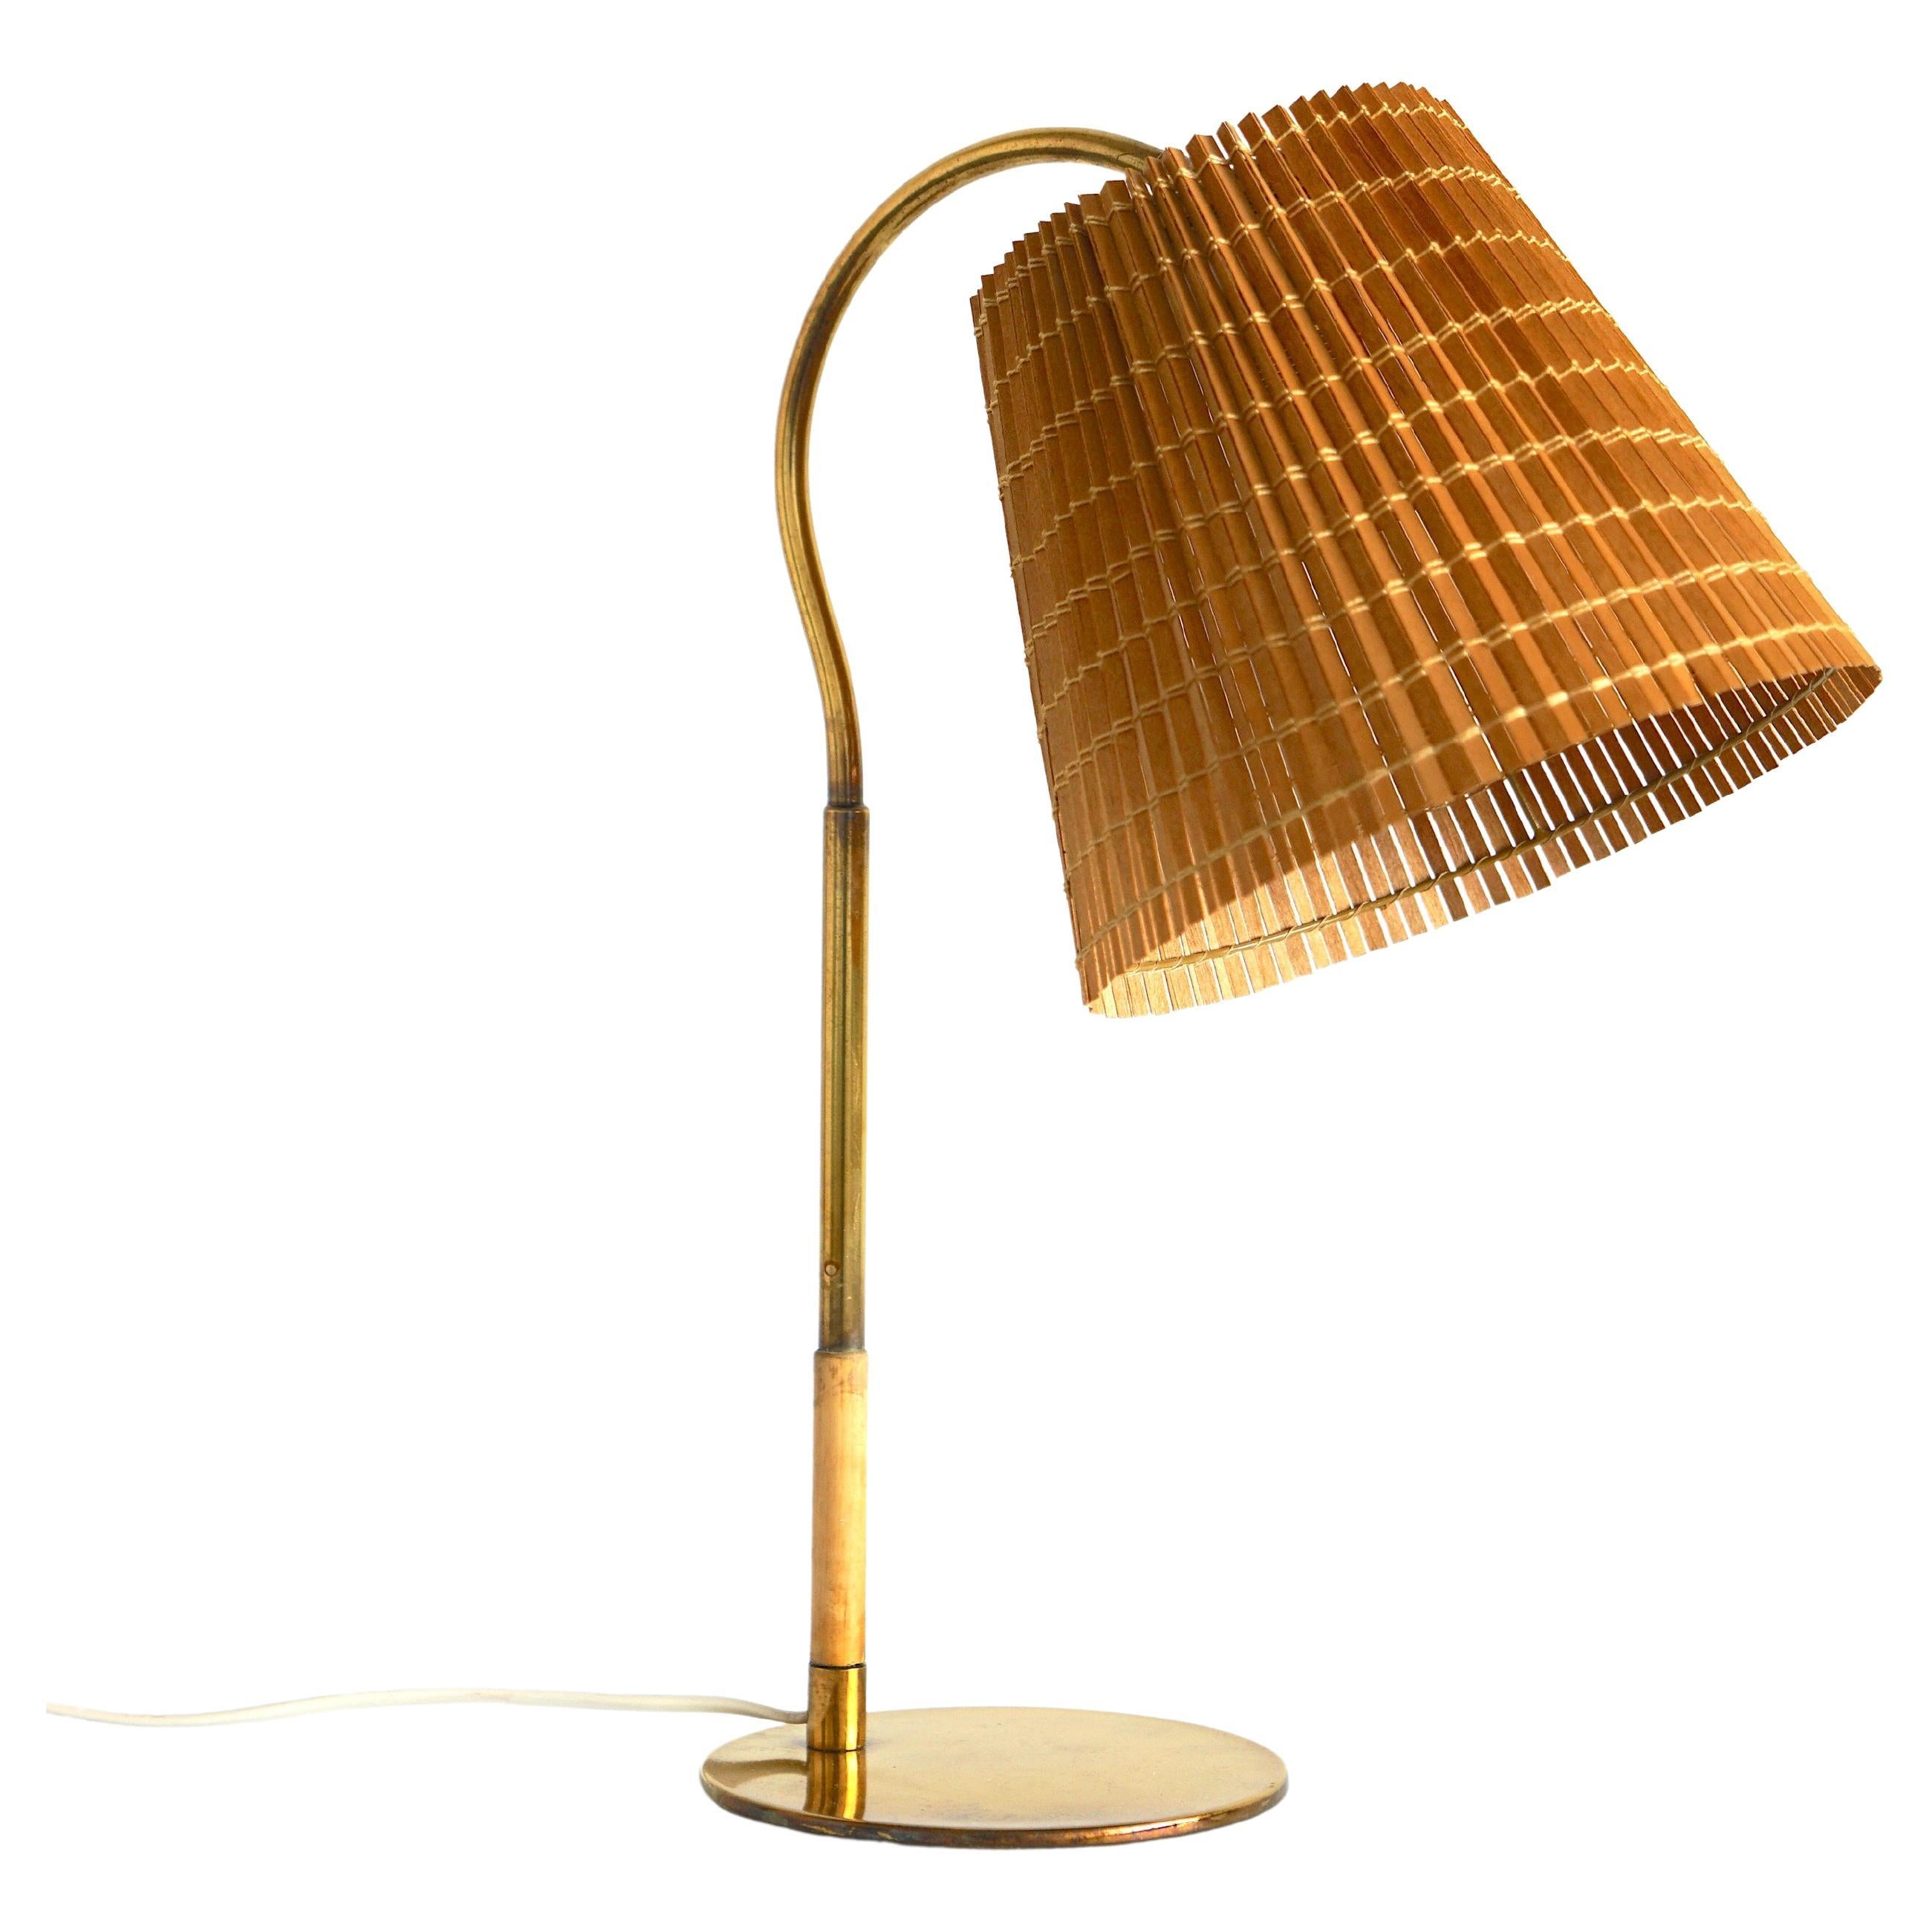 A table lamp by Paavo Tynell, model 9201 / 2 available.